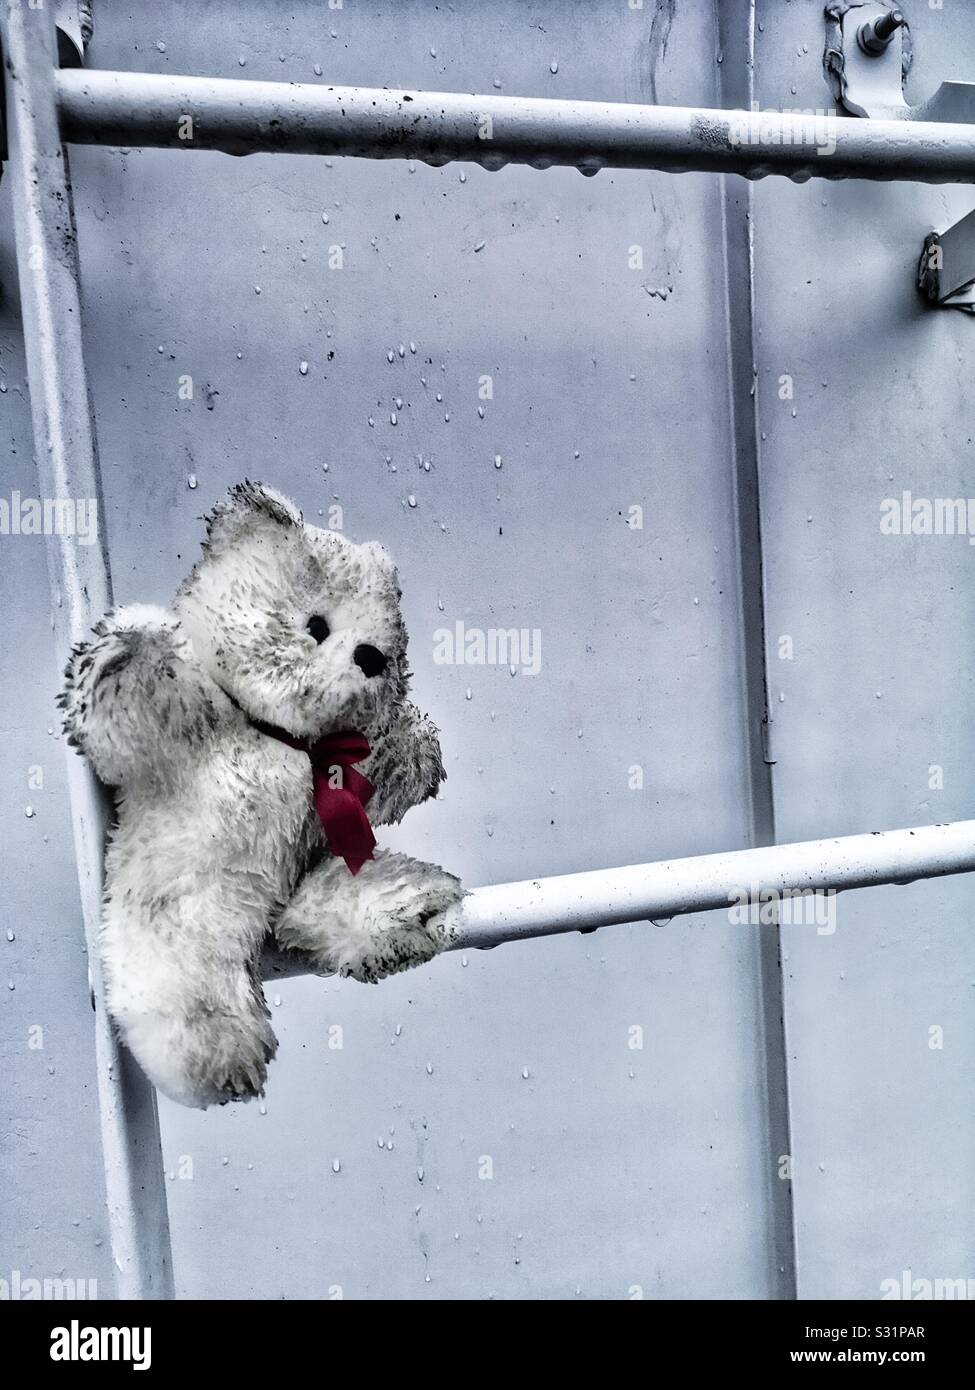 Dirty teddy bear on rung of wet roof escape ladder, Sweden Stock Photo